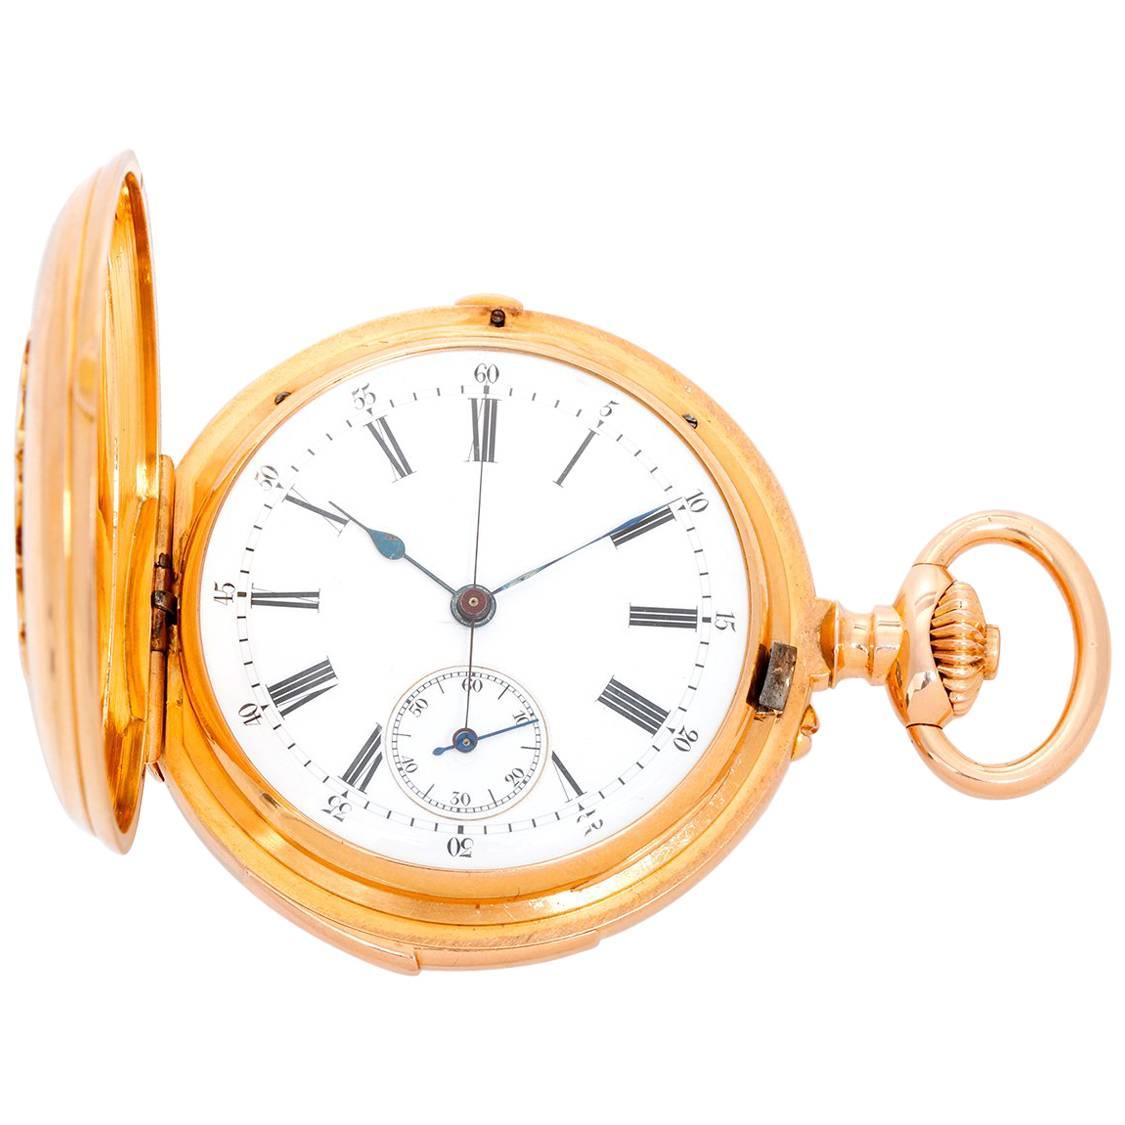 Russel & Fils Retailed by J. F. Bautte & Co. Yellow Gold Pocket Watch, c1877